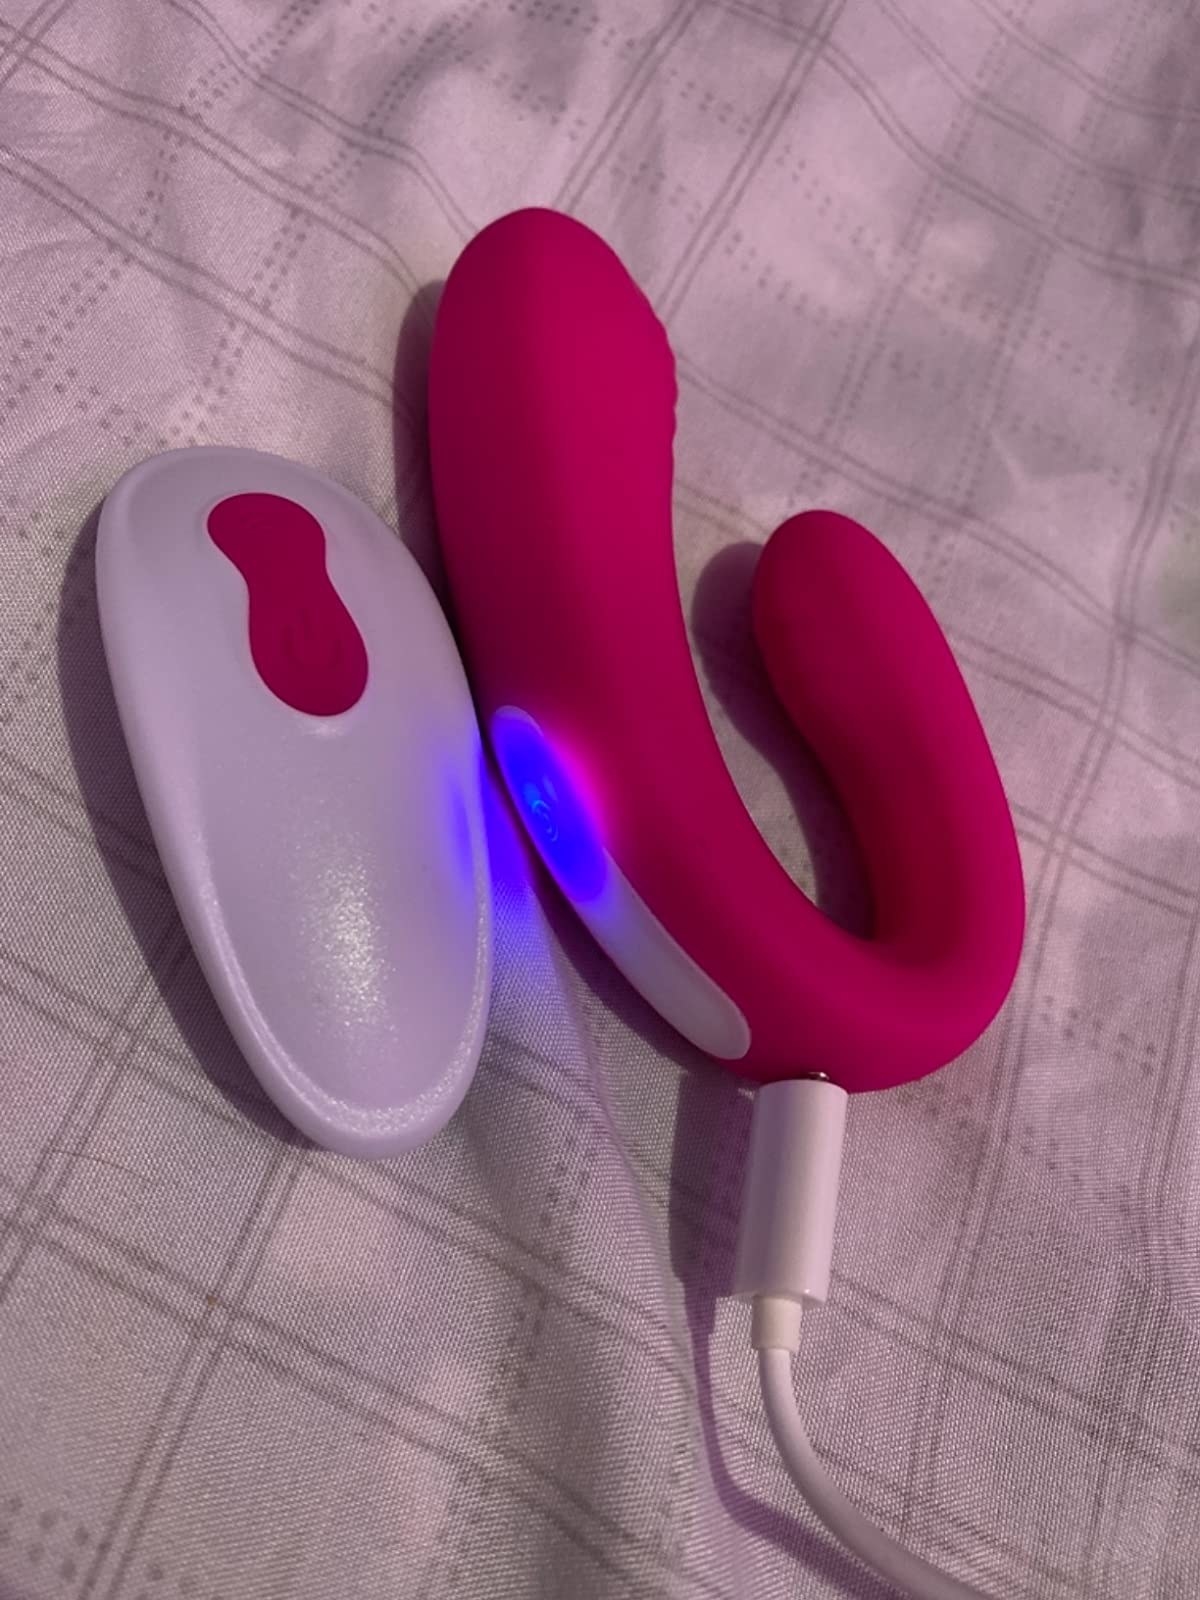 Pink wearable vibrator next to white wireless remote